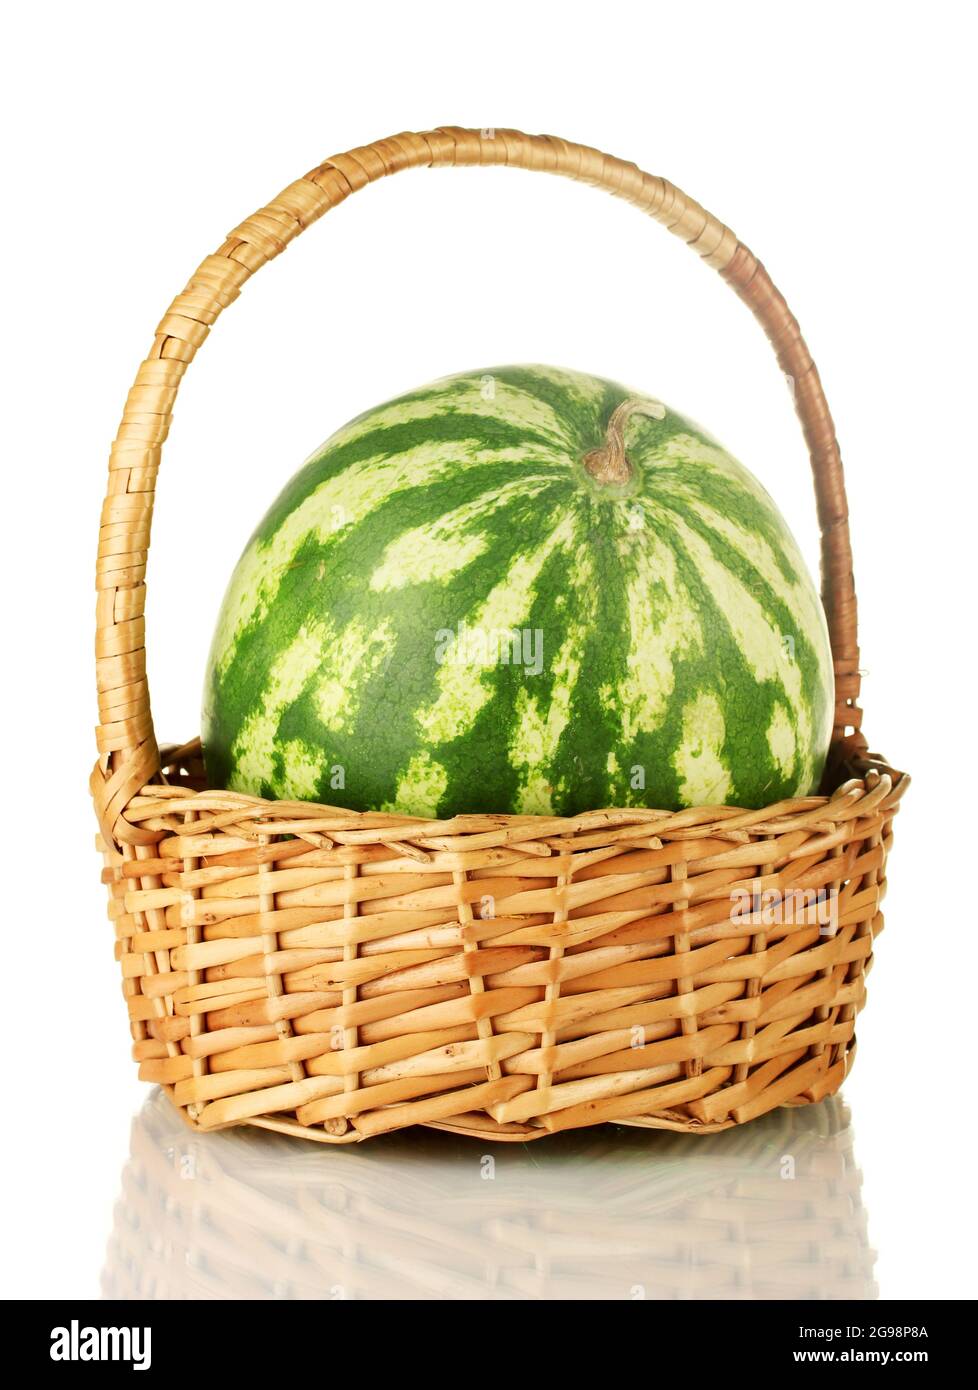 Ripe watermelon in wicker basket isolated on white Stock Photo